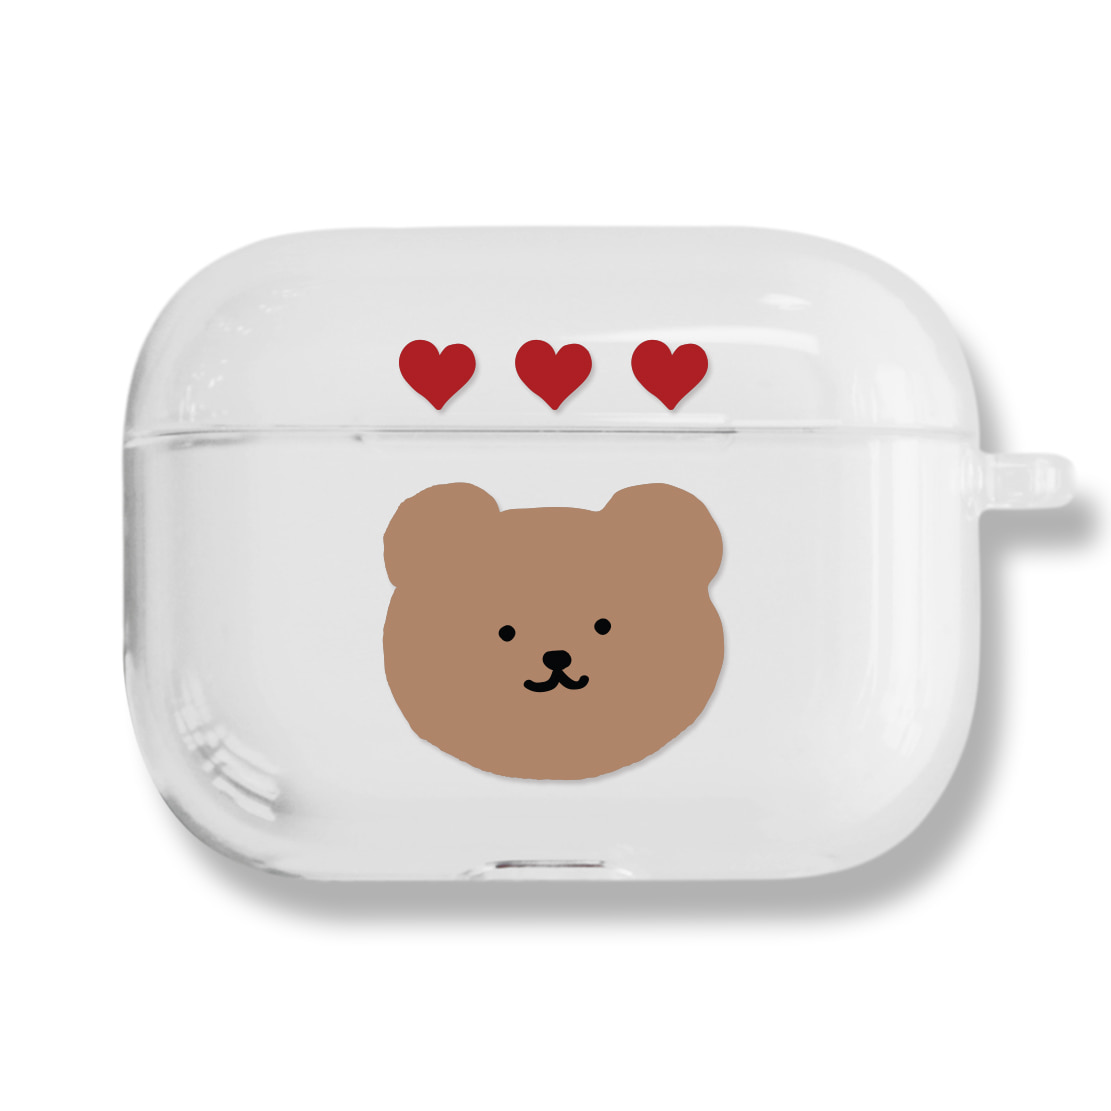 [CLEAR AIRPODS PRO] 500 하뚜곰